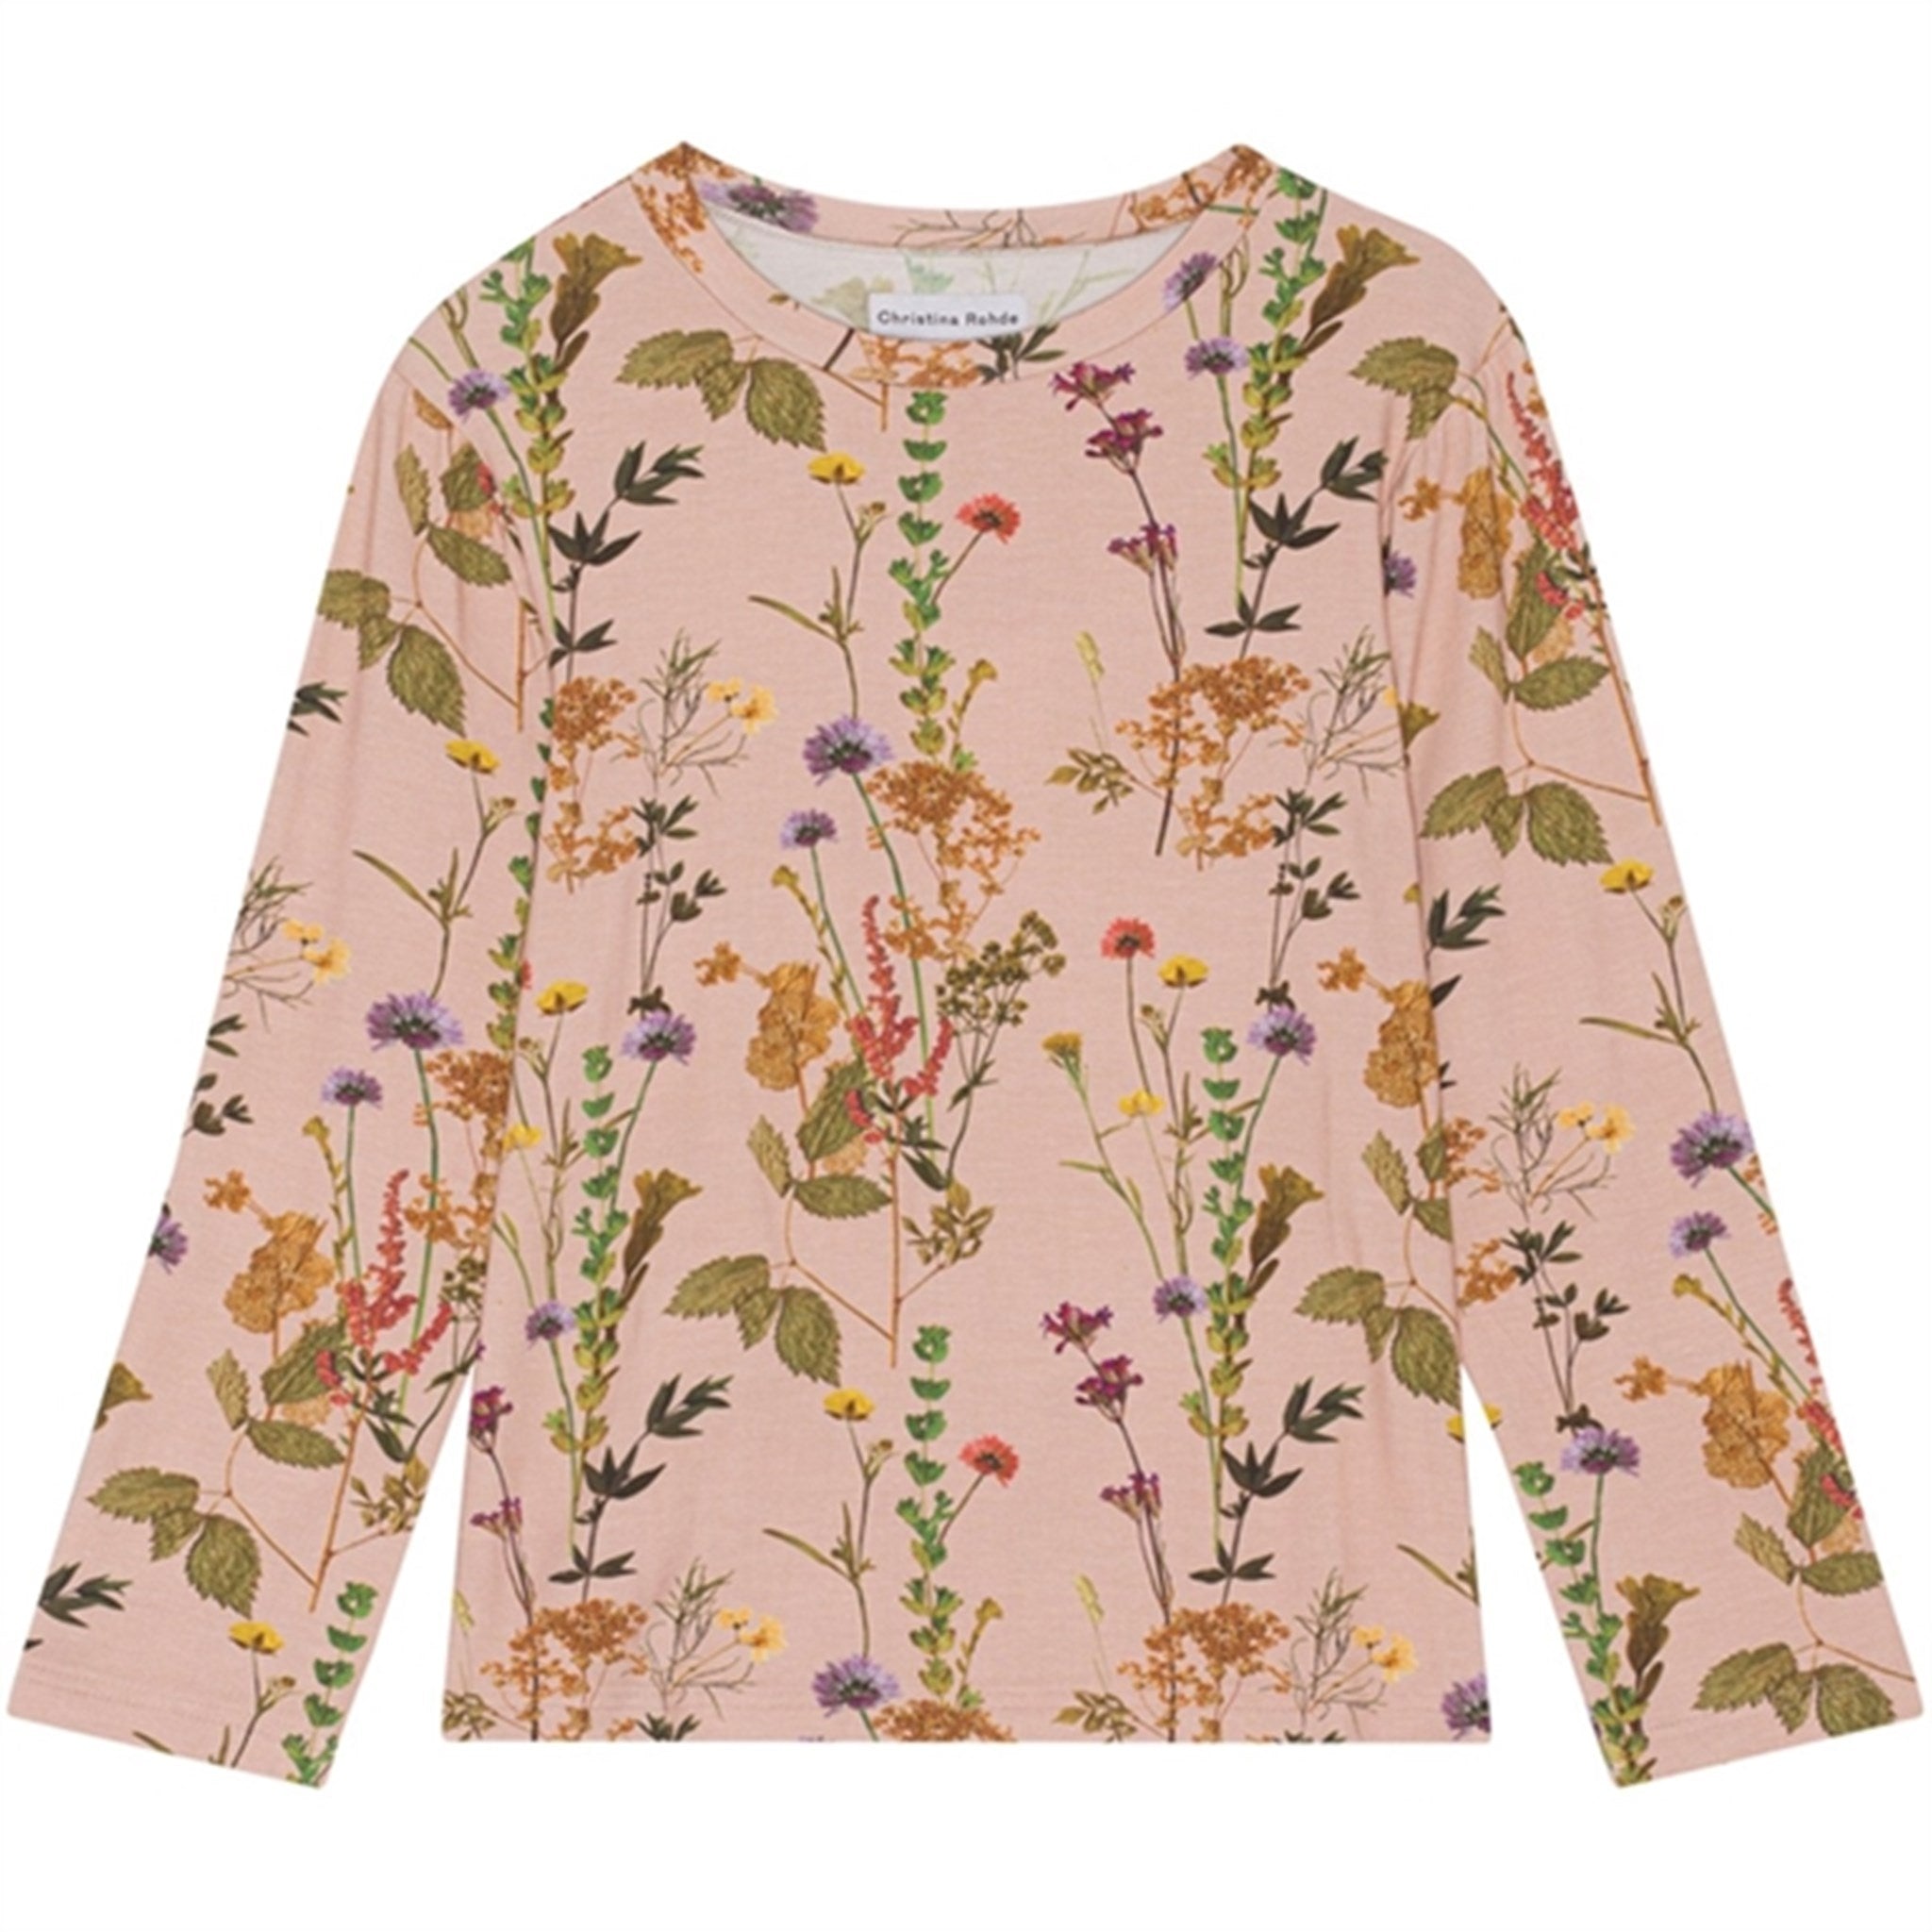 Christina Rohde 405 Blouse Amazing Pale Rose Floral